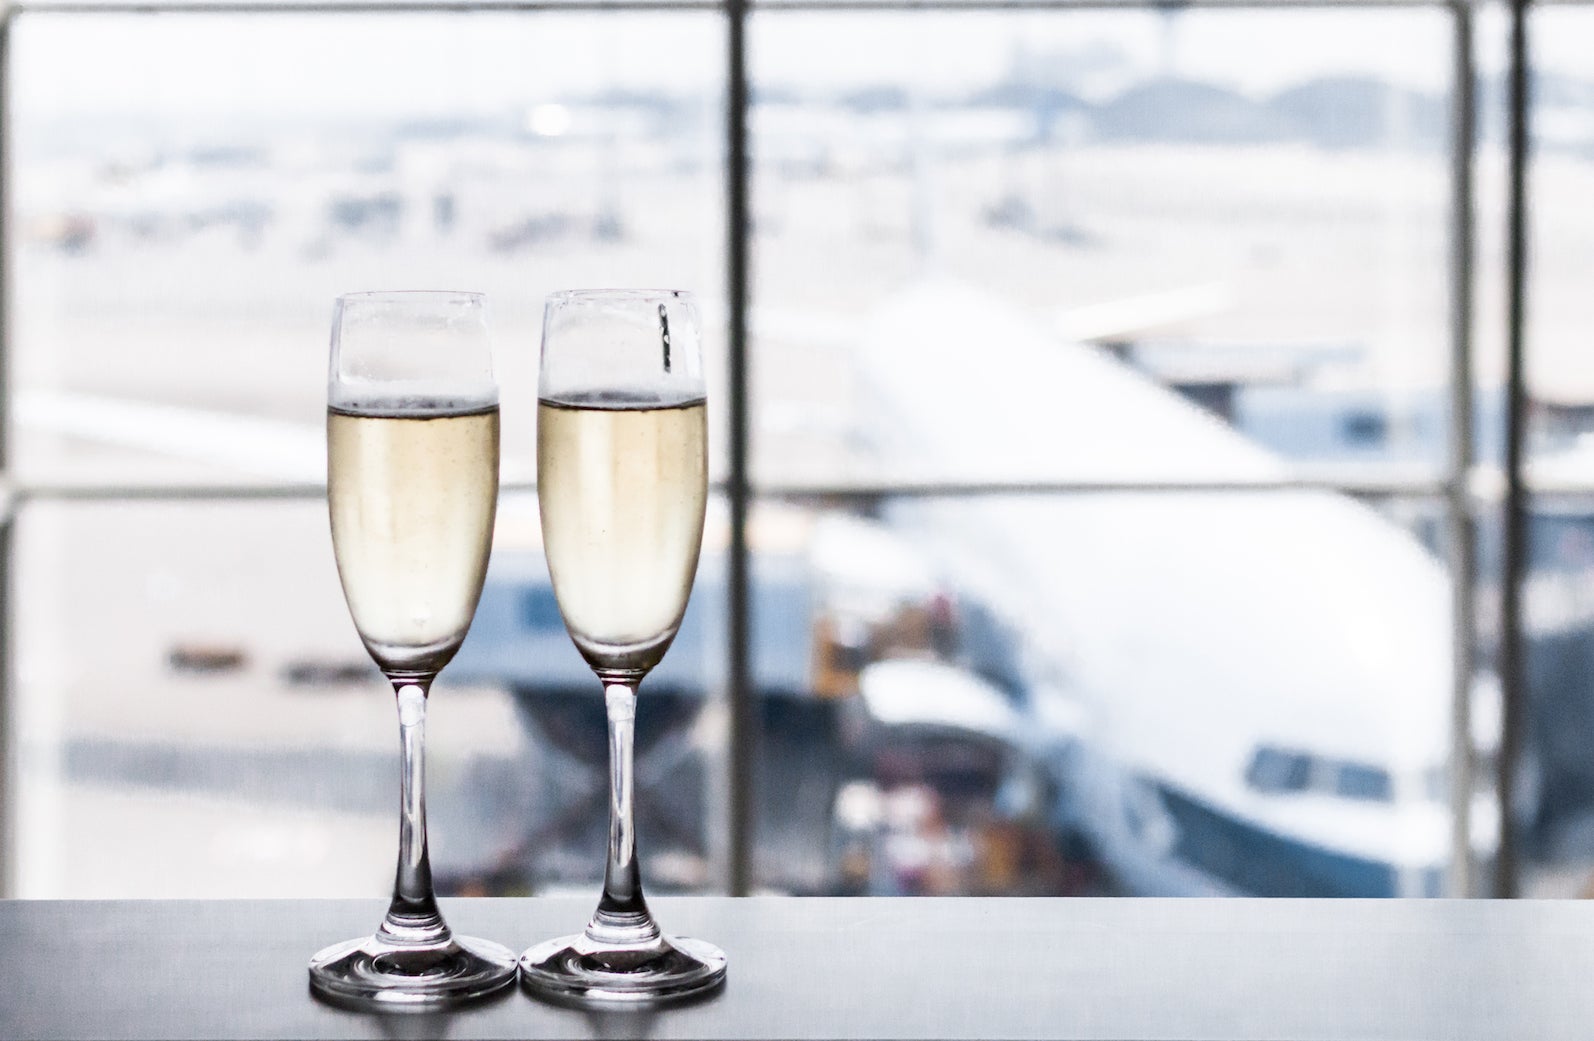 A first timer's guide to flying in first or business class - The Points Guy